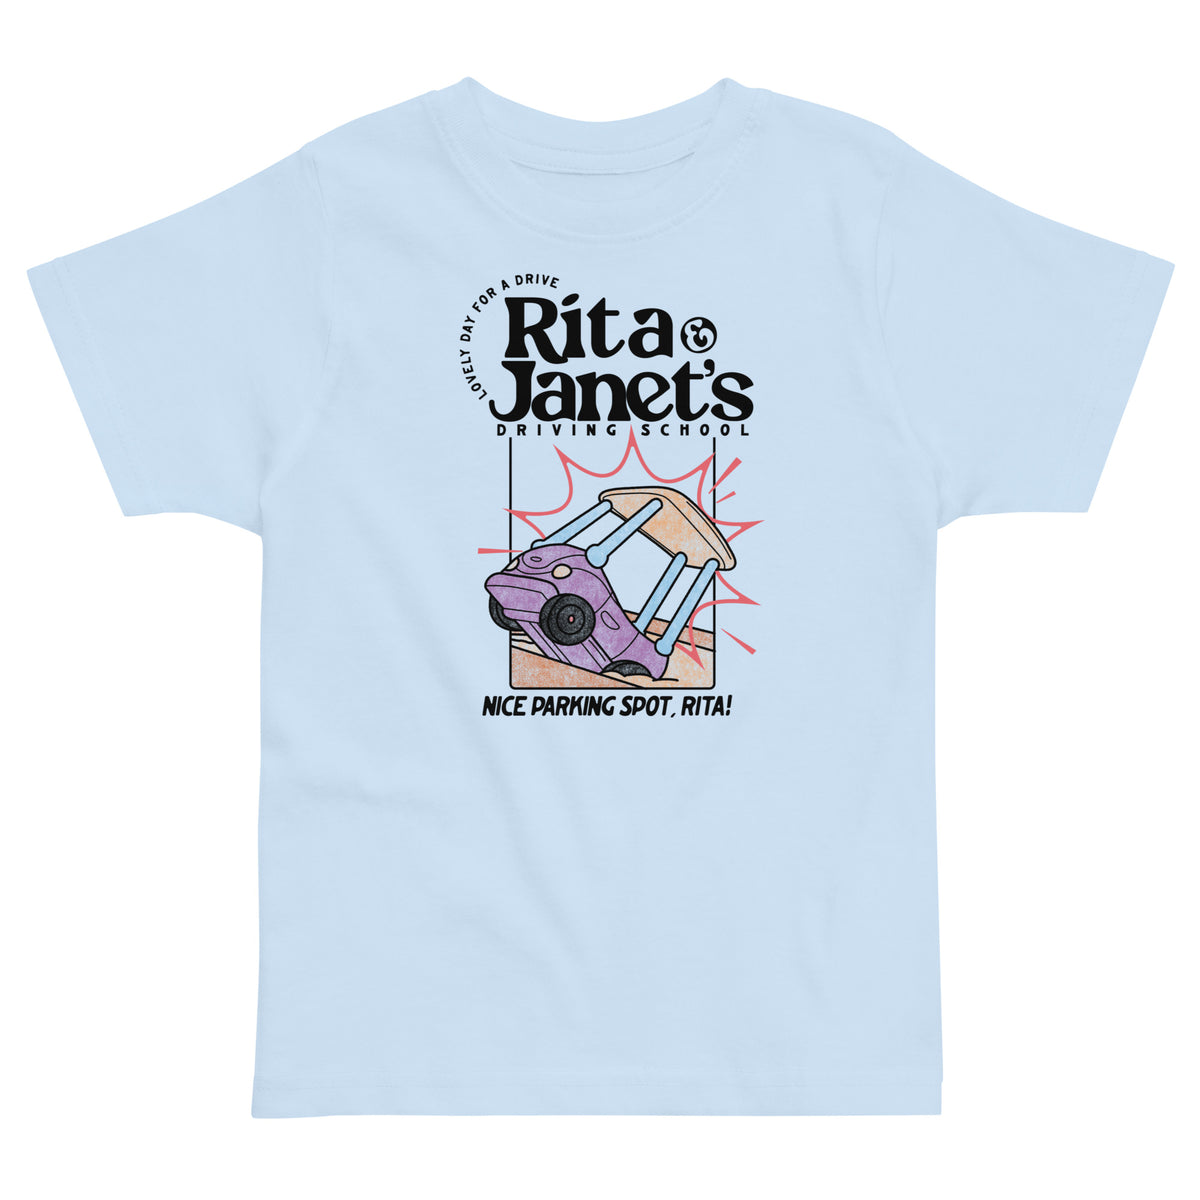 Rita and Janets Driving School Toddler Jersey T-shirt